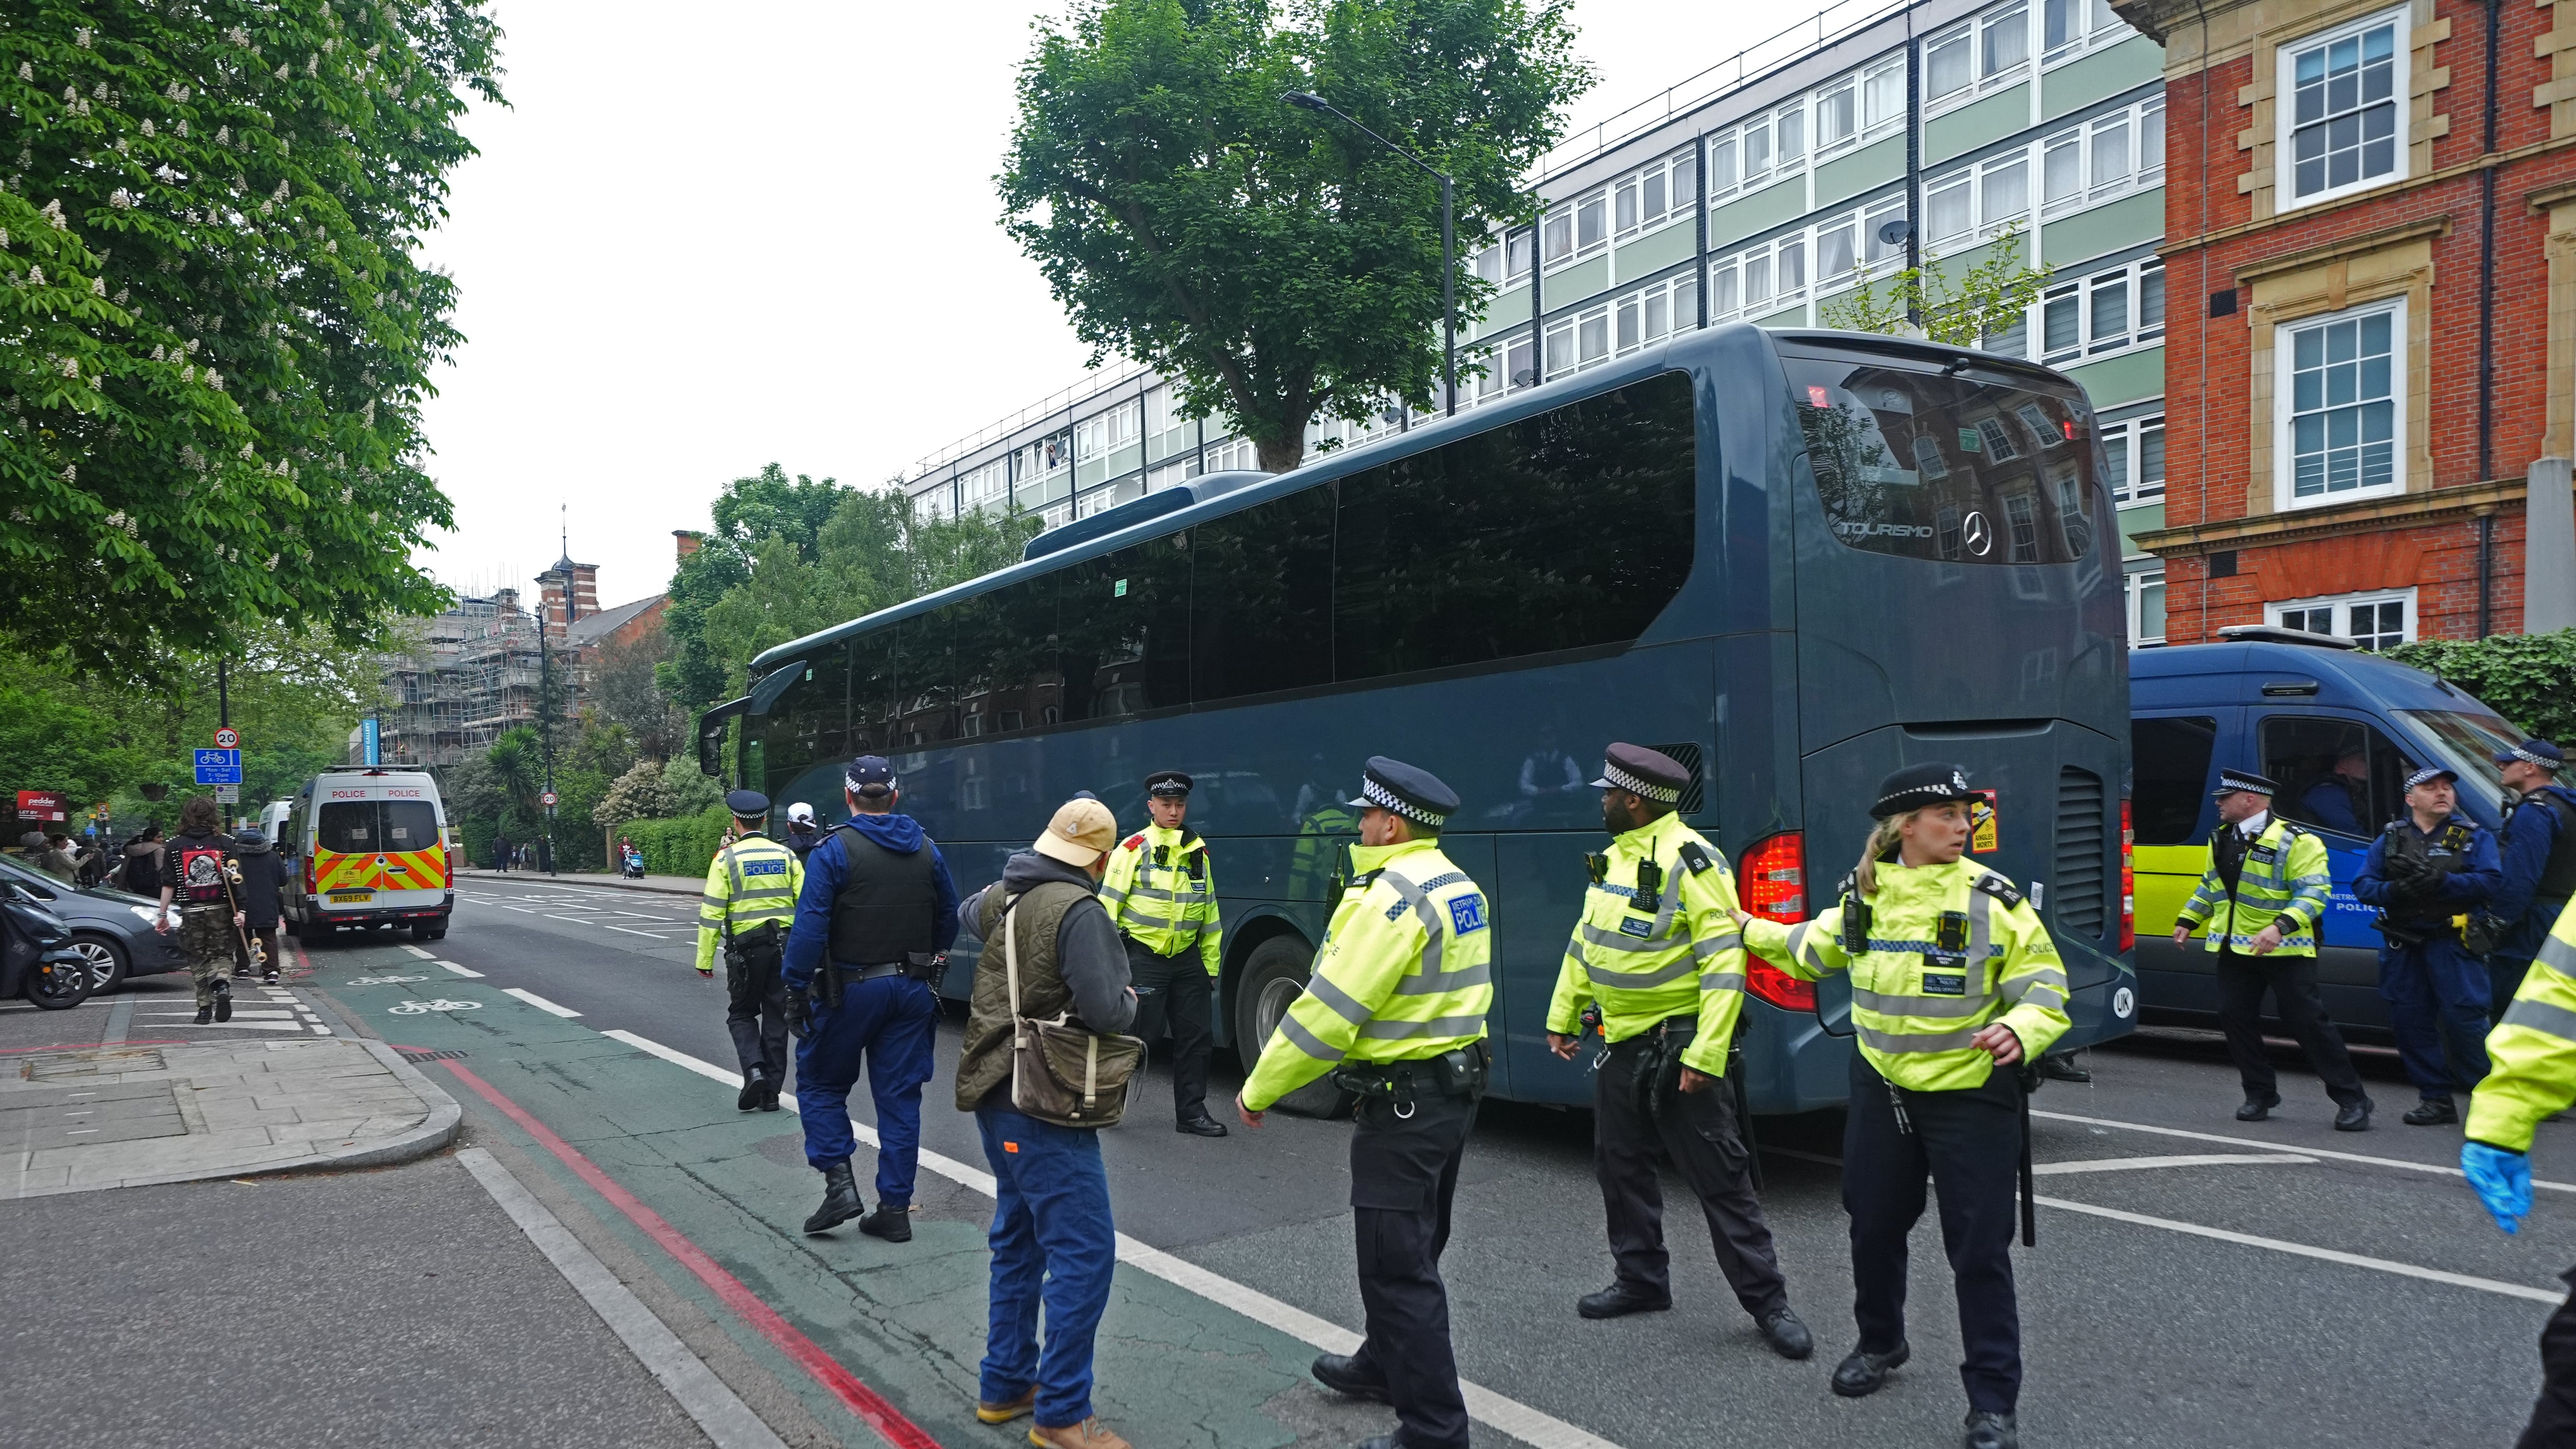 Police move protesters as the coach leaves after demonstrators formed a blockade around a it